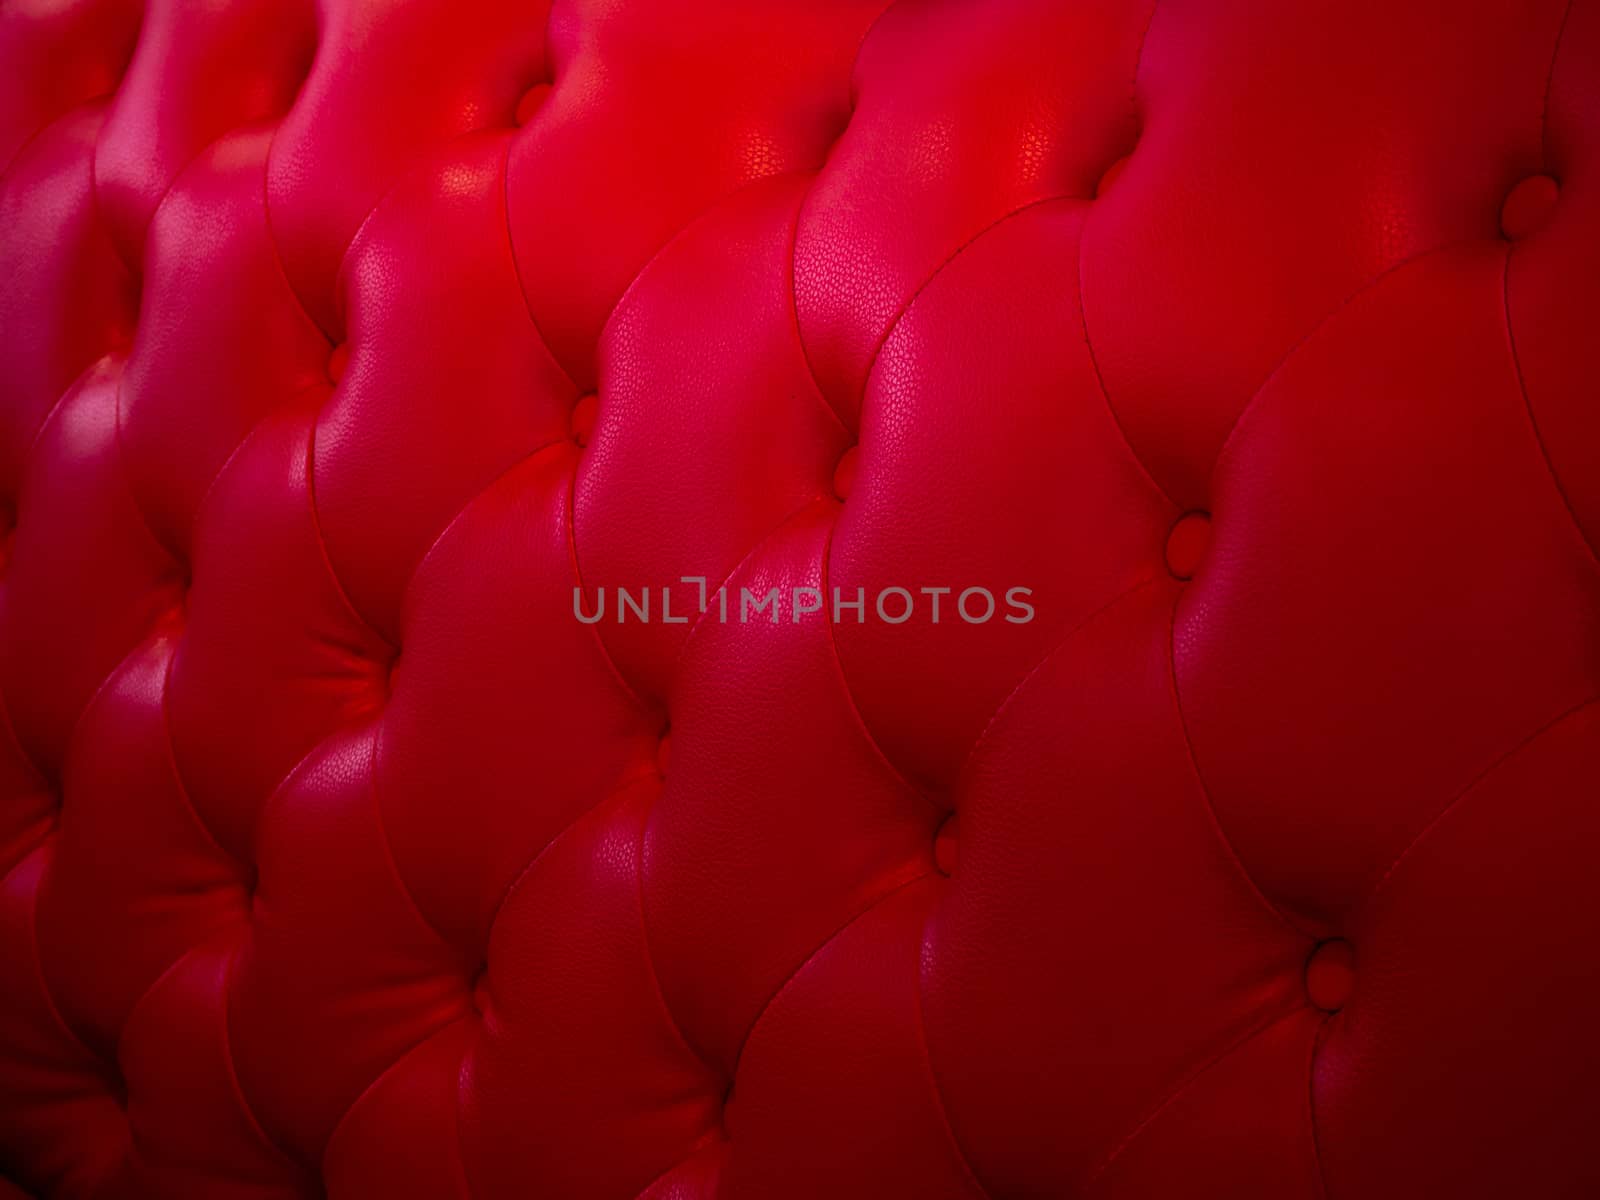 Background from leather of cushion. Red leather from retro chair by shutterbird